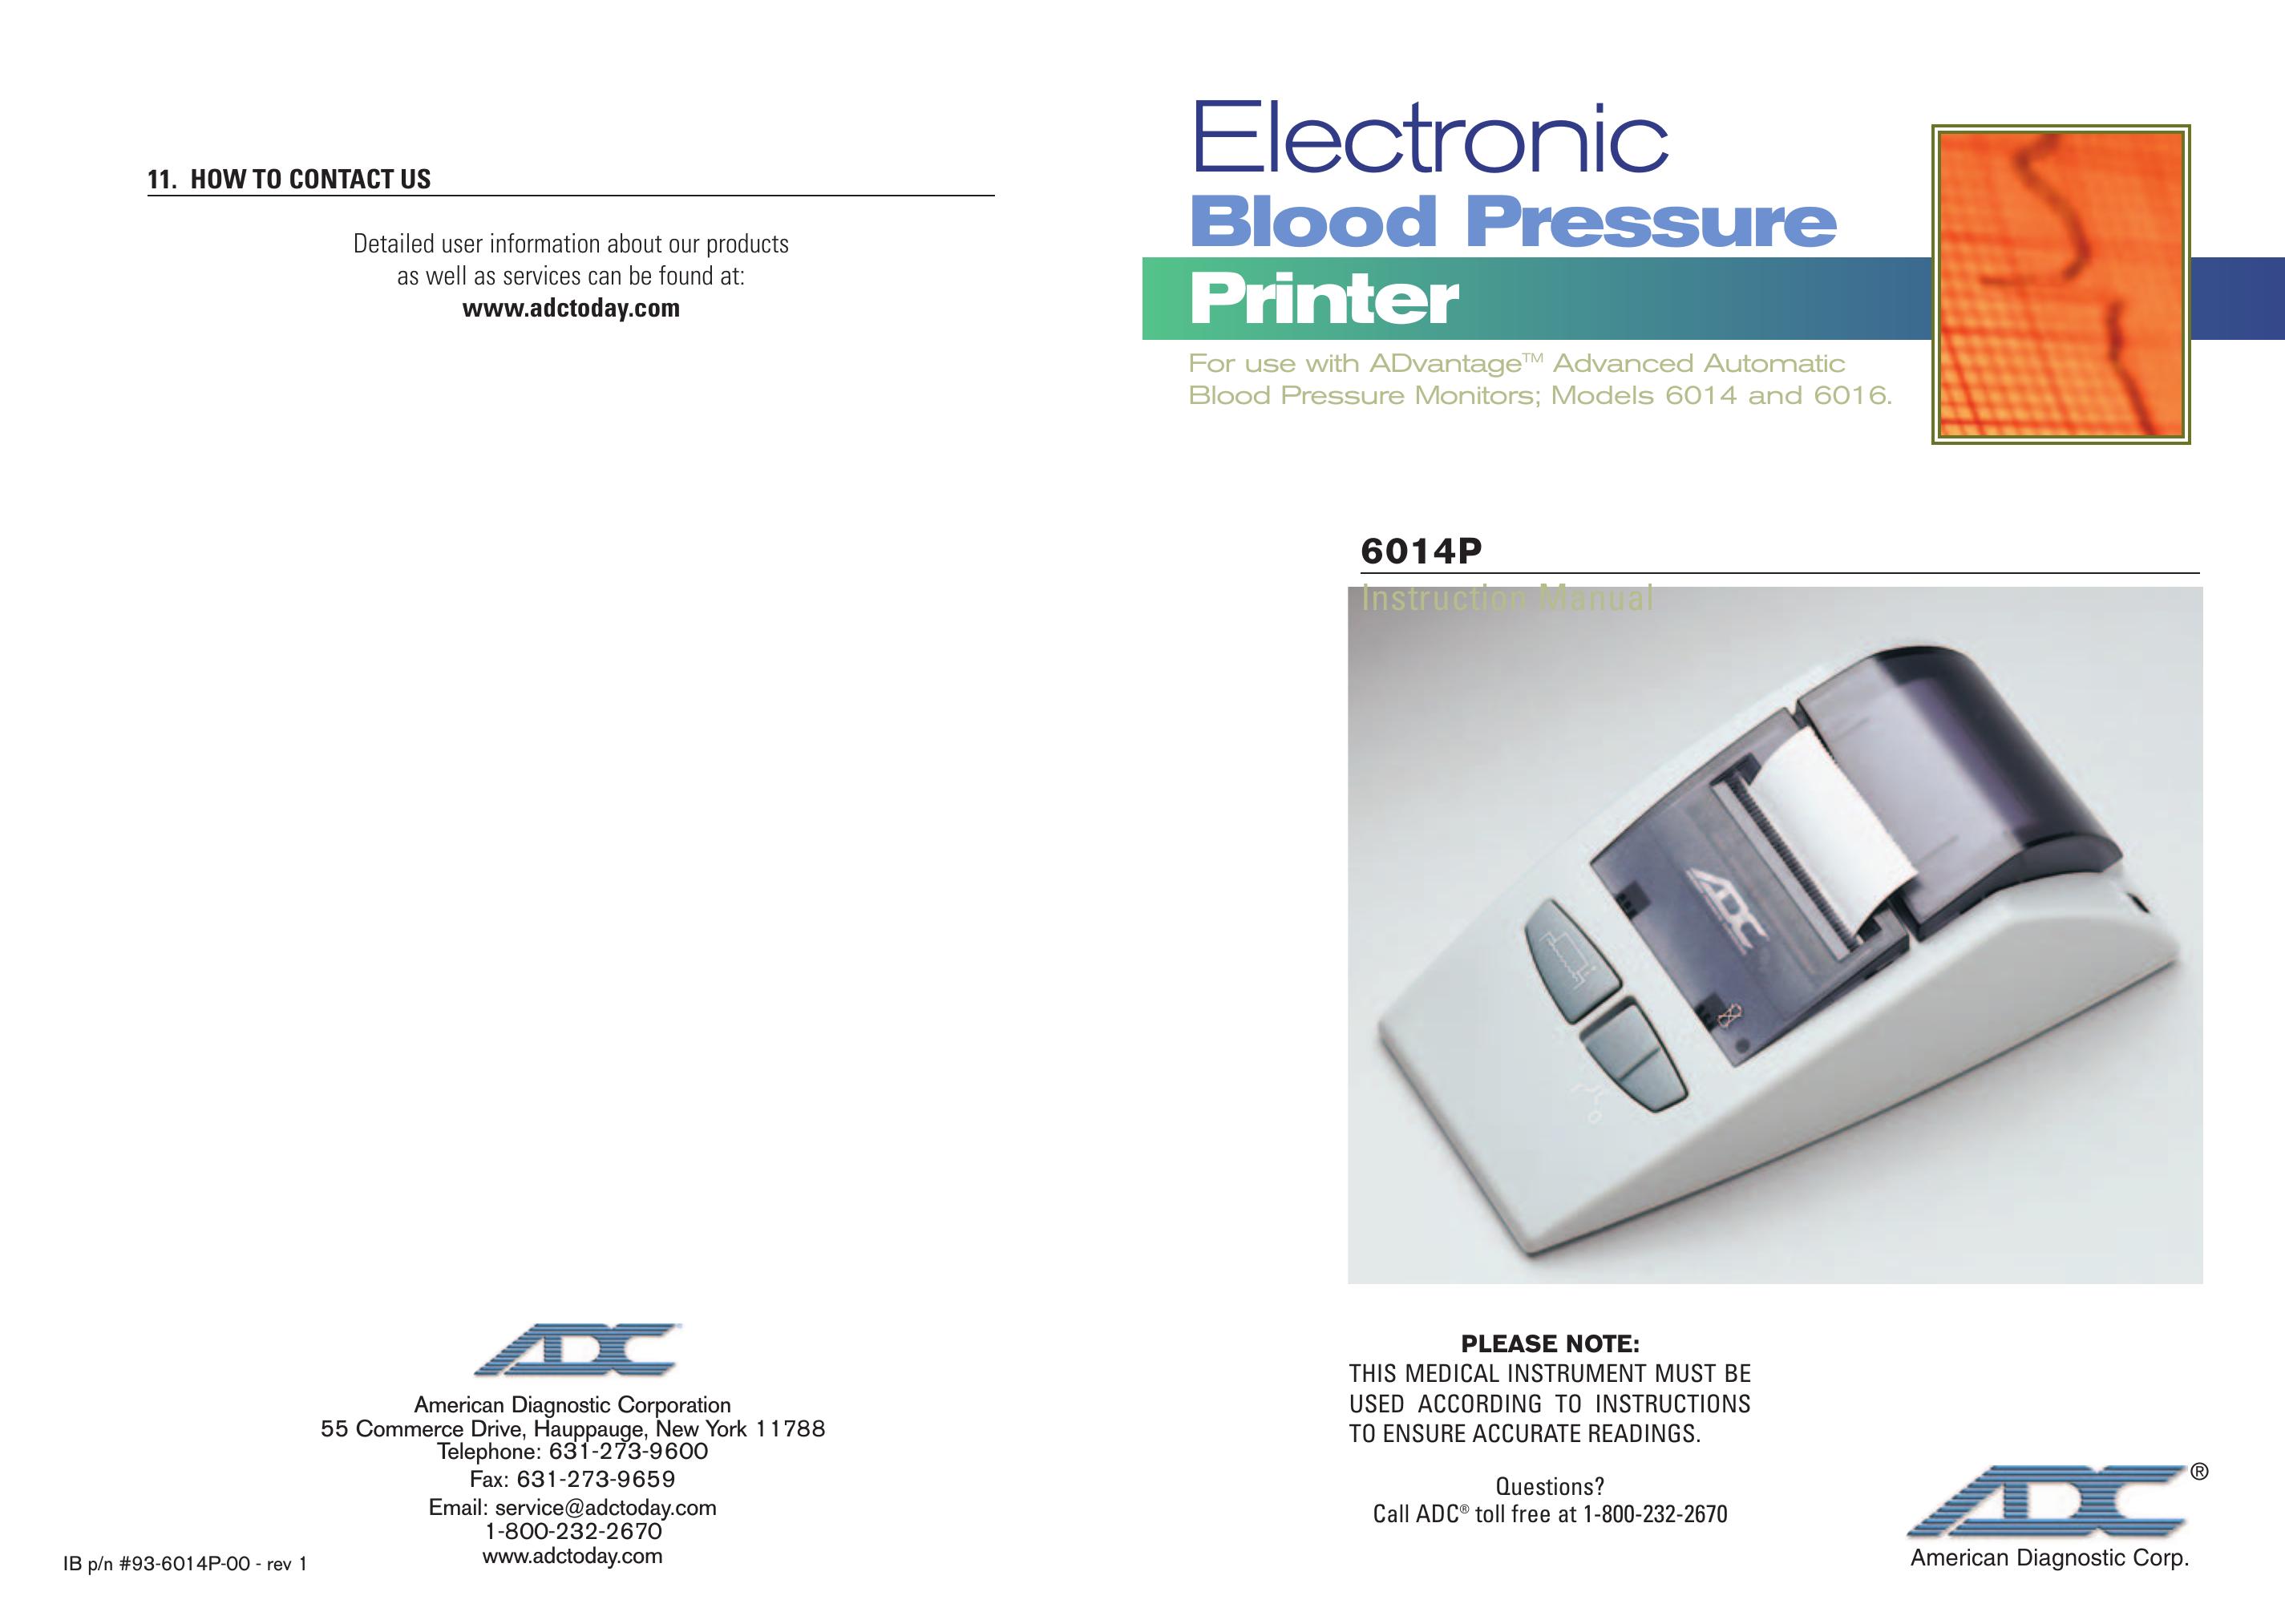 ADC 6016 Blood Pressure Monitor User Manual (Page 1)